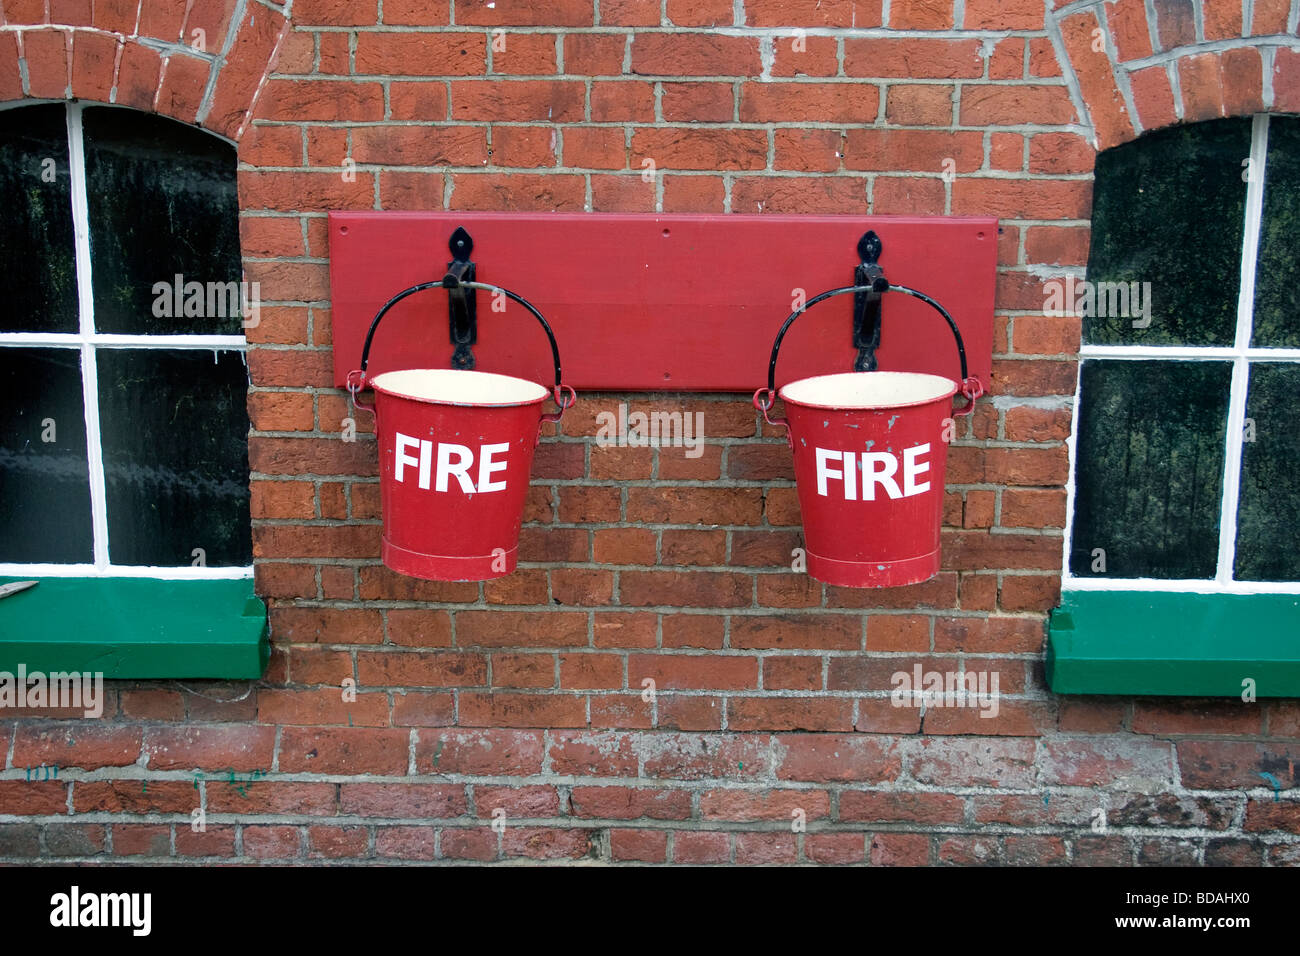 Fire buckets at the Lavender Line, Isfield, Sussex, England Stock Photo